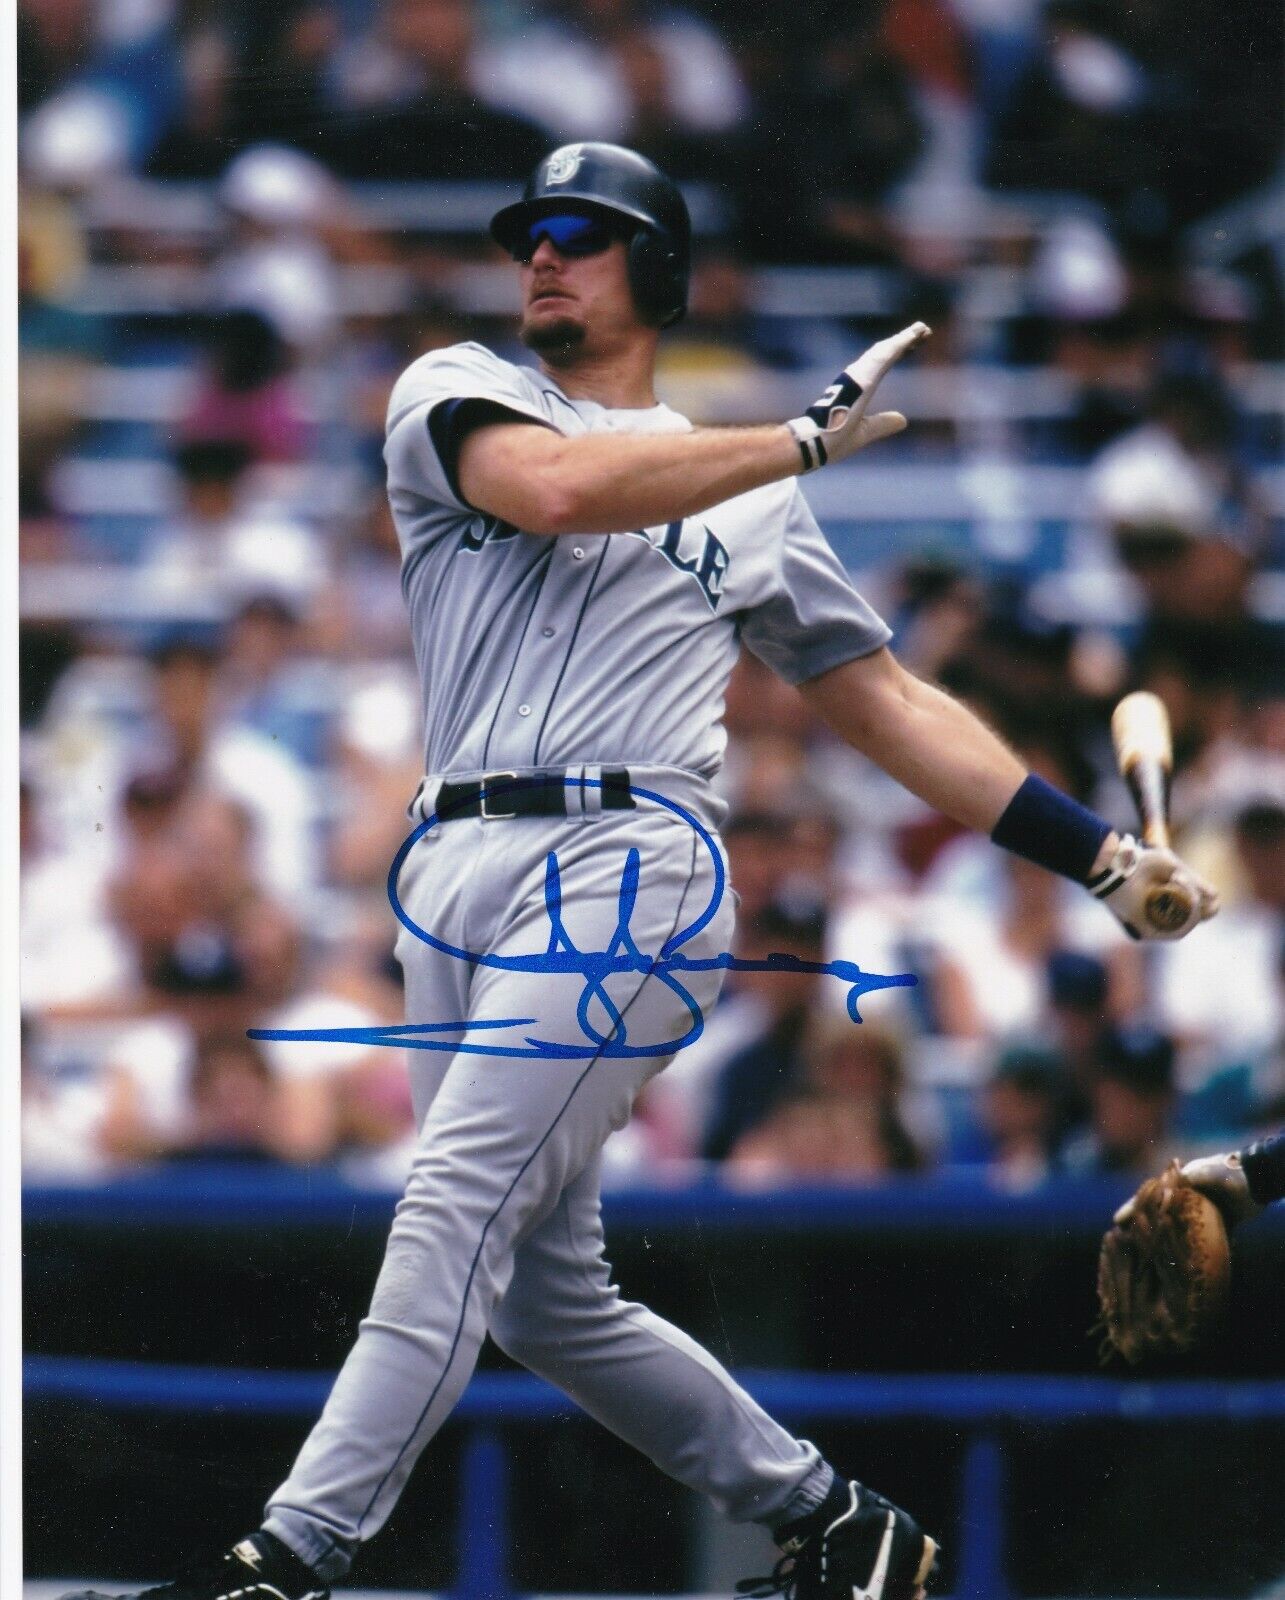 JAY BUHNER SEATTLE MARINERS ACTION SIGNED 8x10